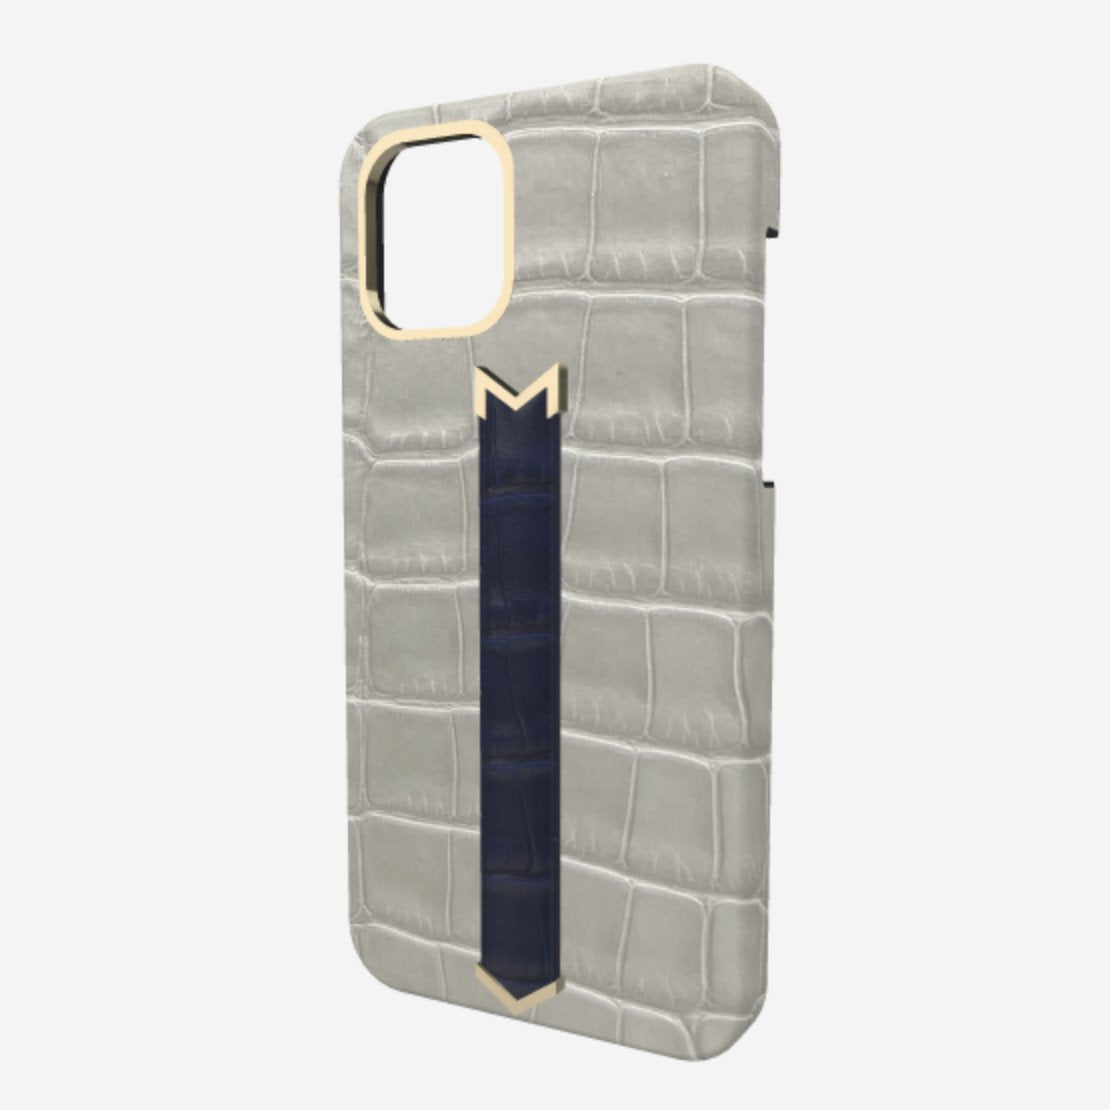 Gold Finger Strap Case for iPhone 13 Pro Max in Genuine Alligator Pearl Grey Navy Blue 